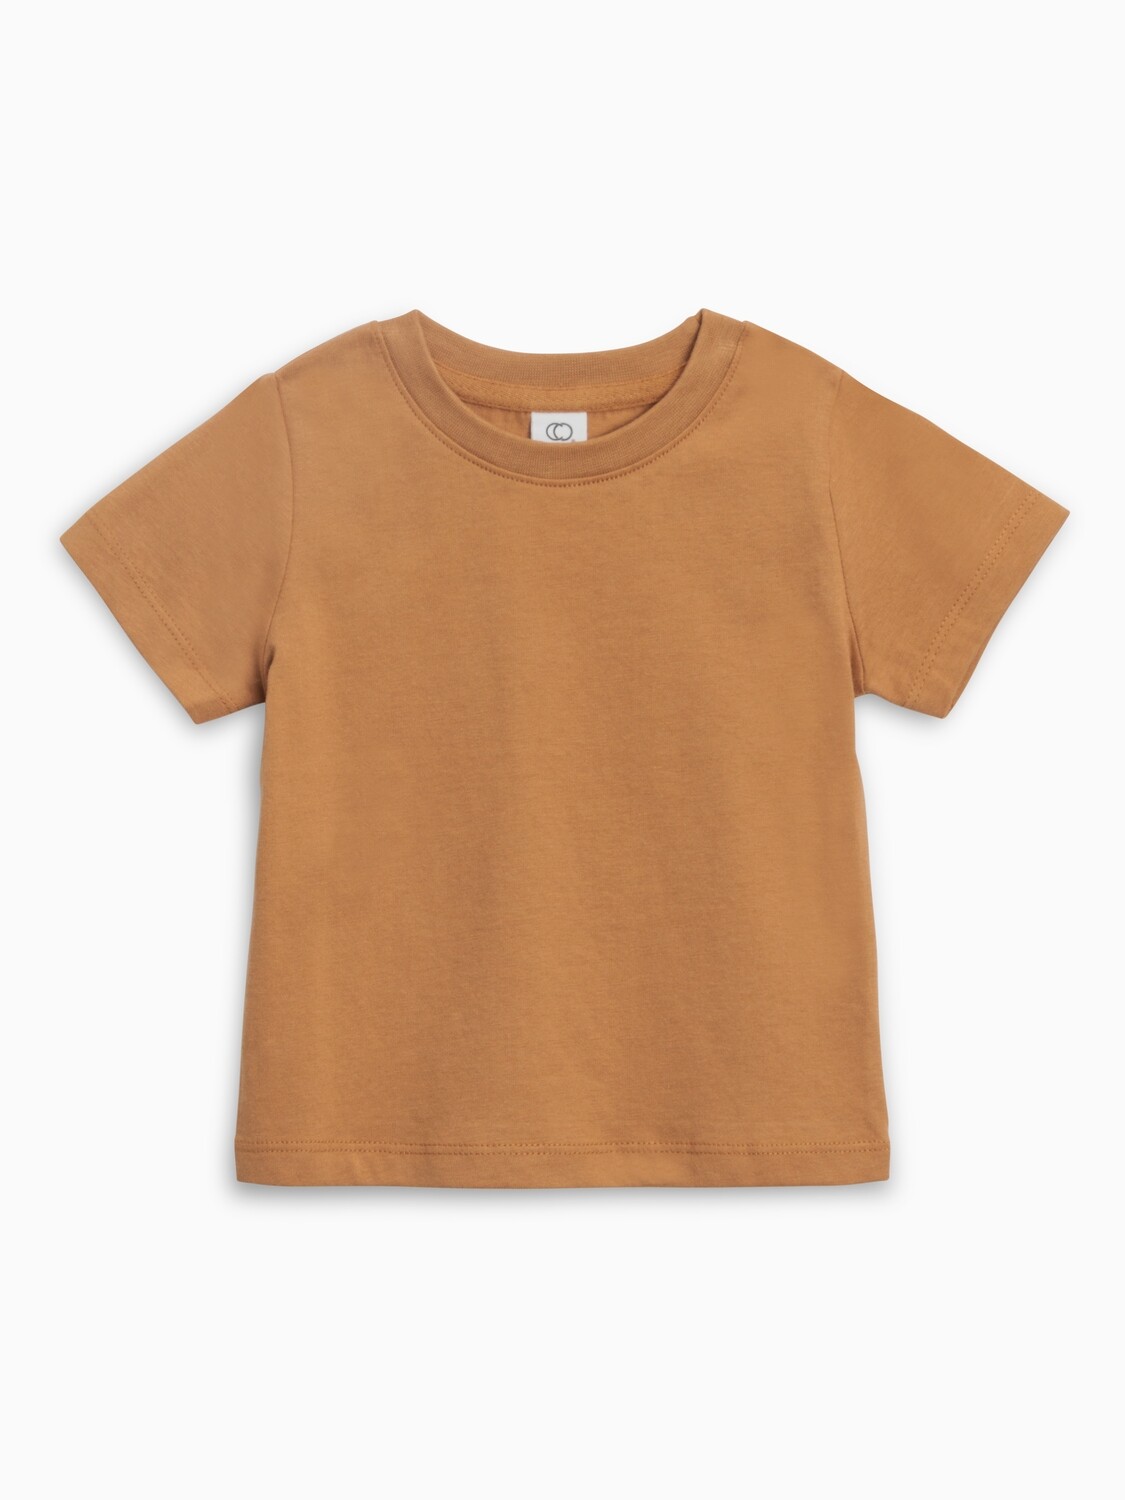 Classic Short Sleeve Tee - Crew Neck, Size: 3T - Ginger